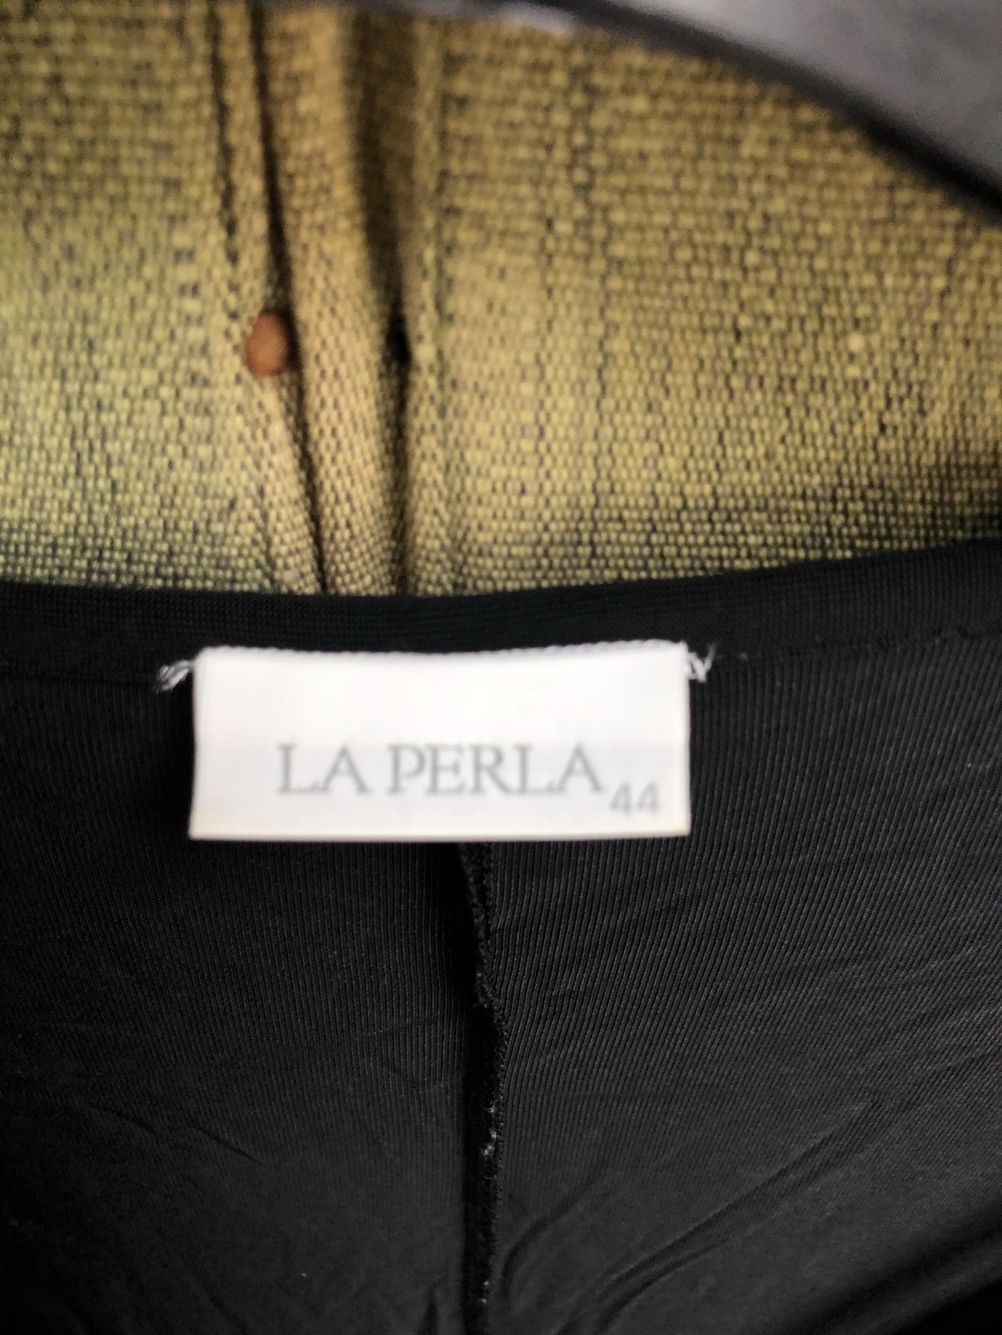 A GOTTEX BLACK AND WHITE CHECK LONG SLEEVED SHEER DRESS SIZE SMALL AND A LA PERLA SIZE 44 BLACK - Bild 20 aus 25